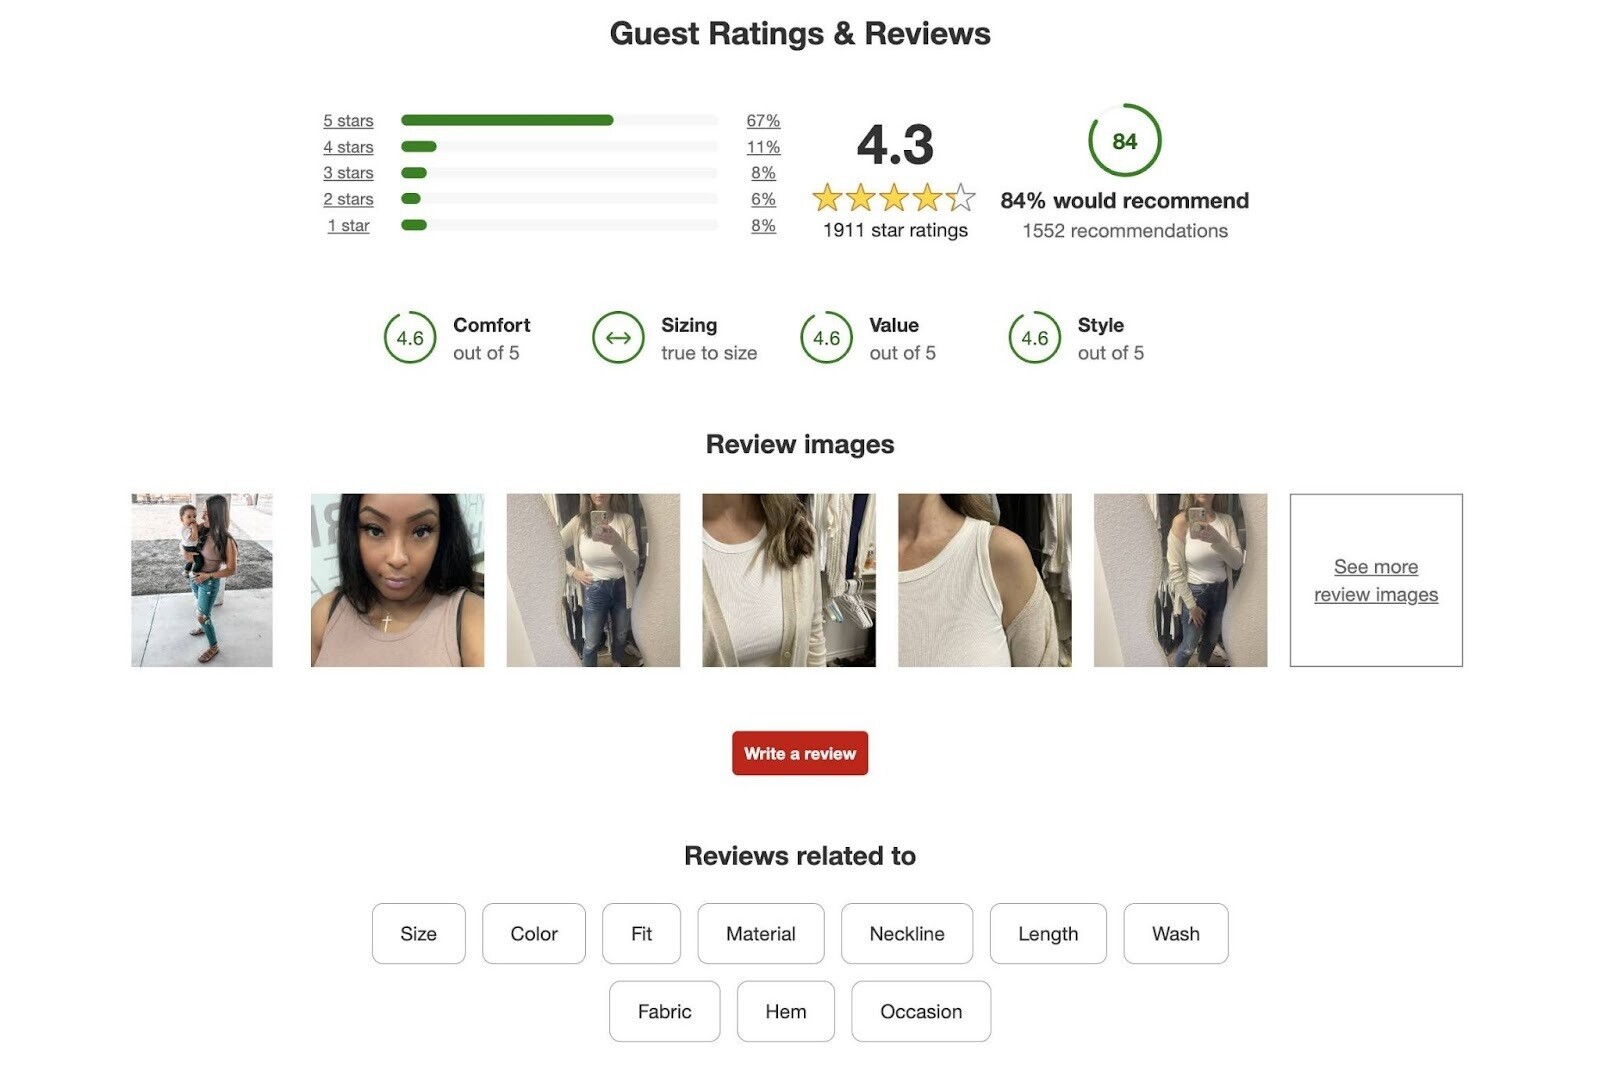 Guest ratings and reviews page